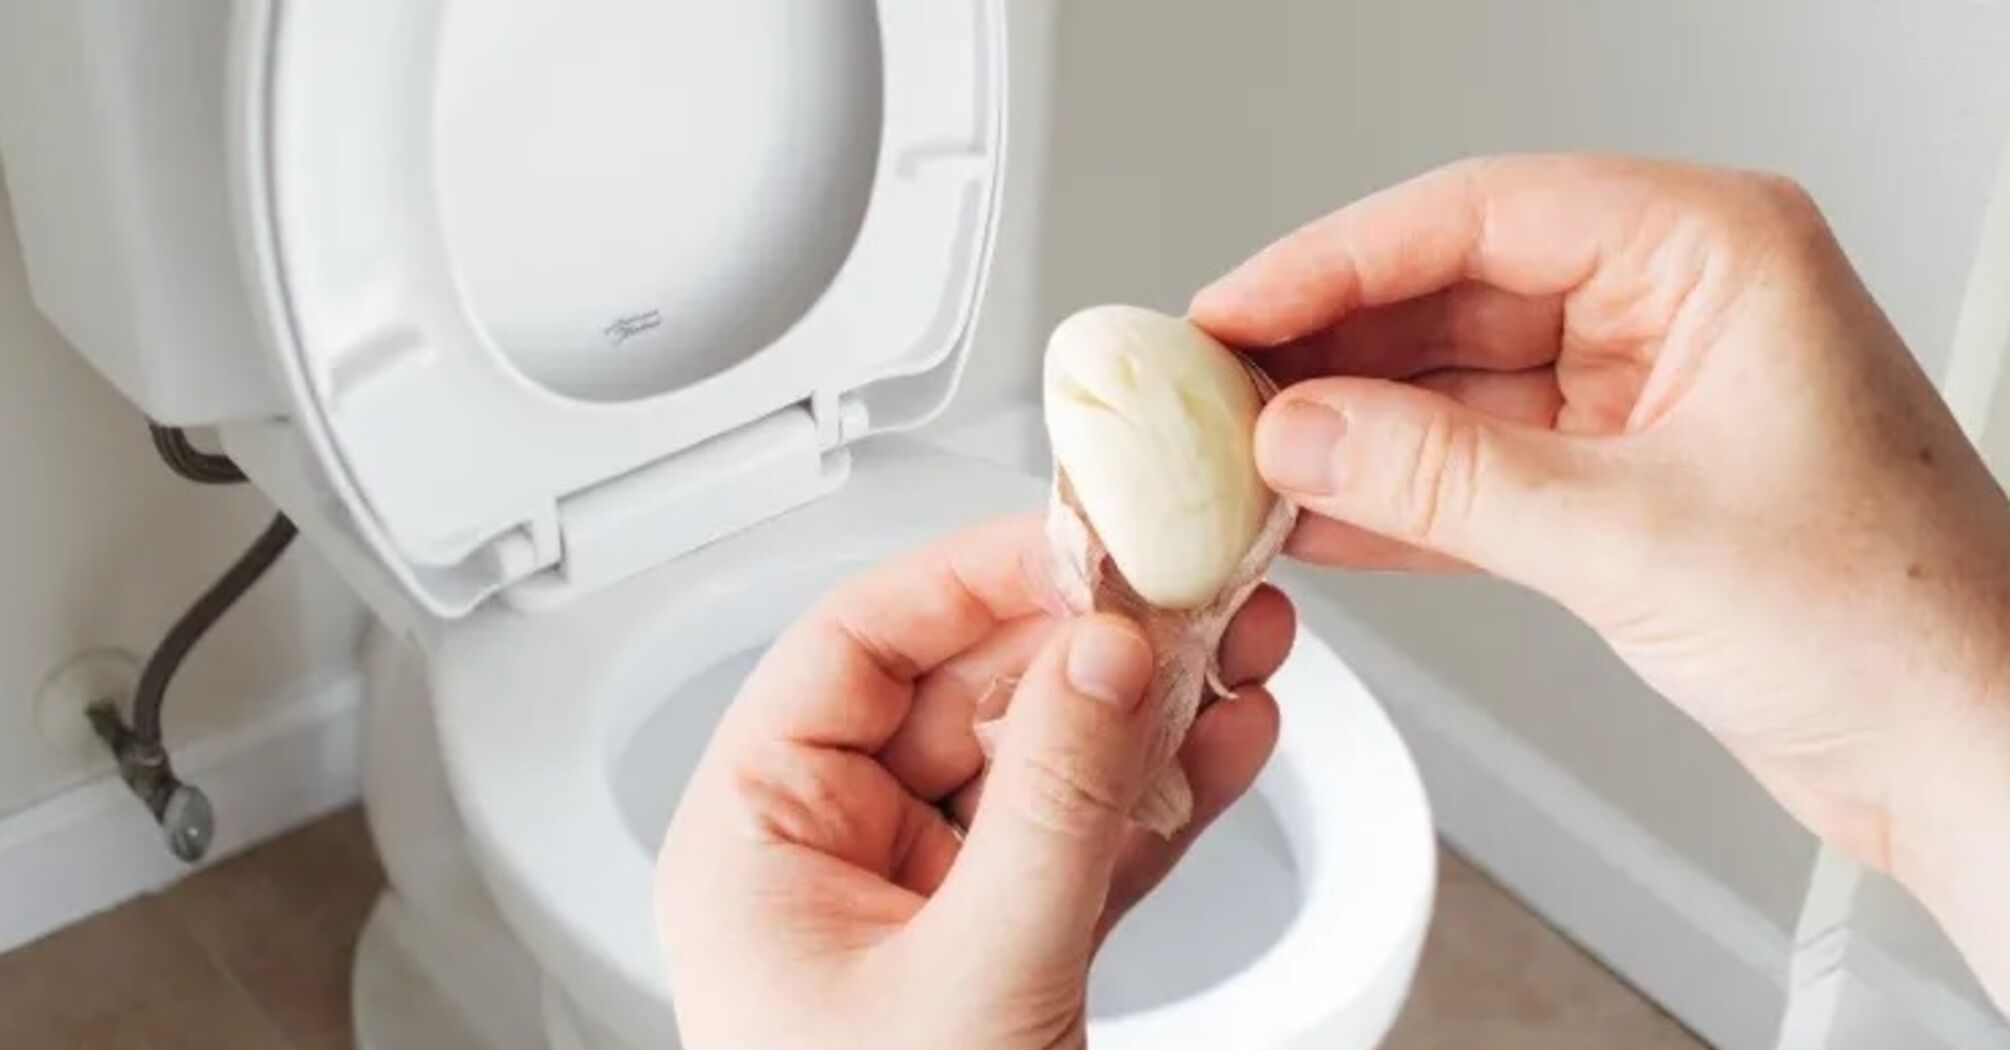 Why put a clove of garlic in the toilet: a really effective way of cleaning